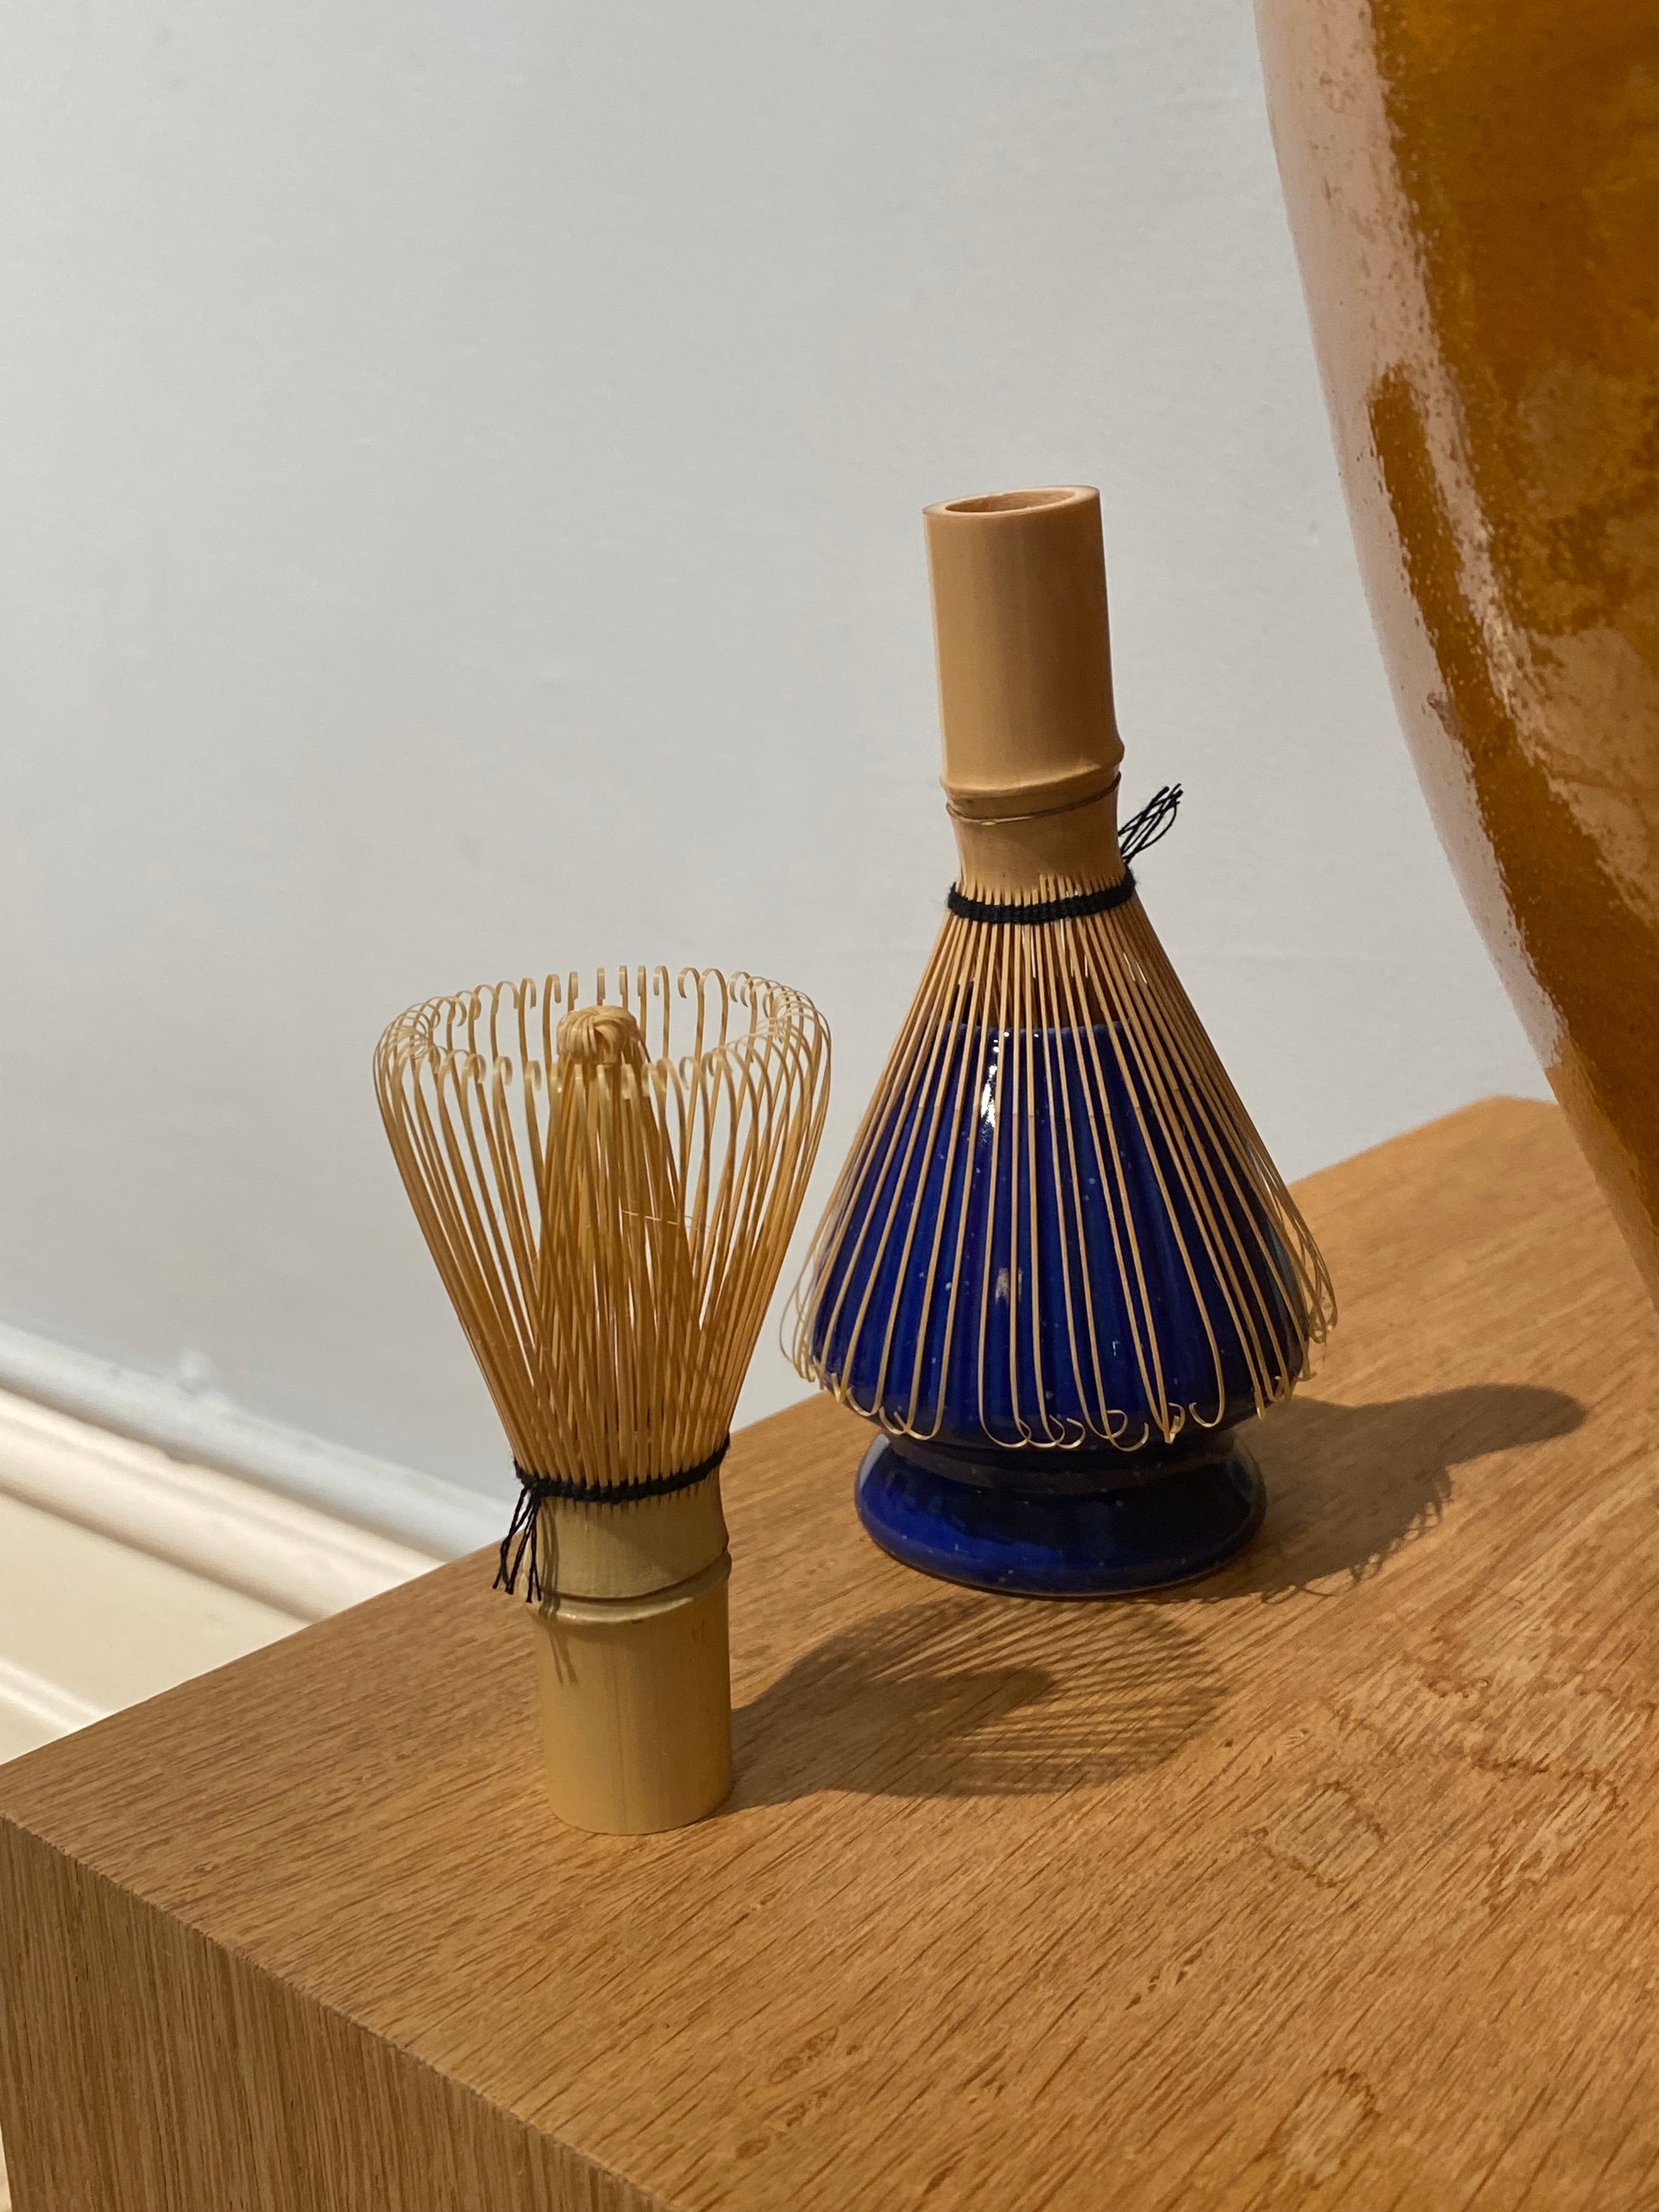 Small bamboo whisk - light